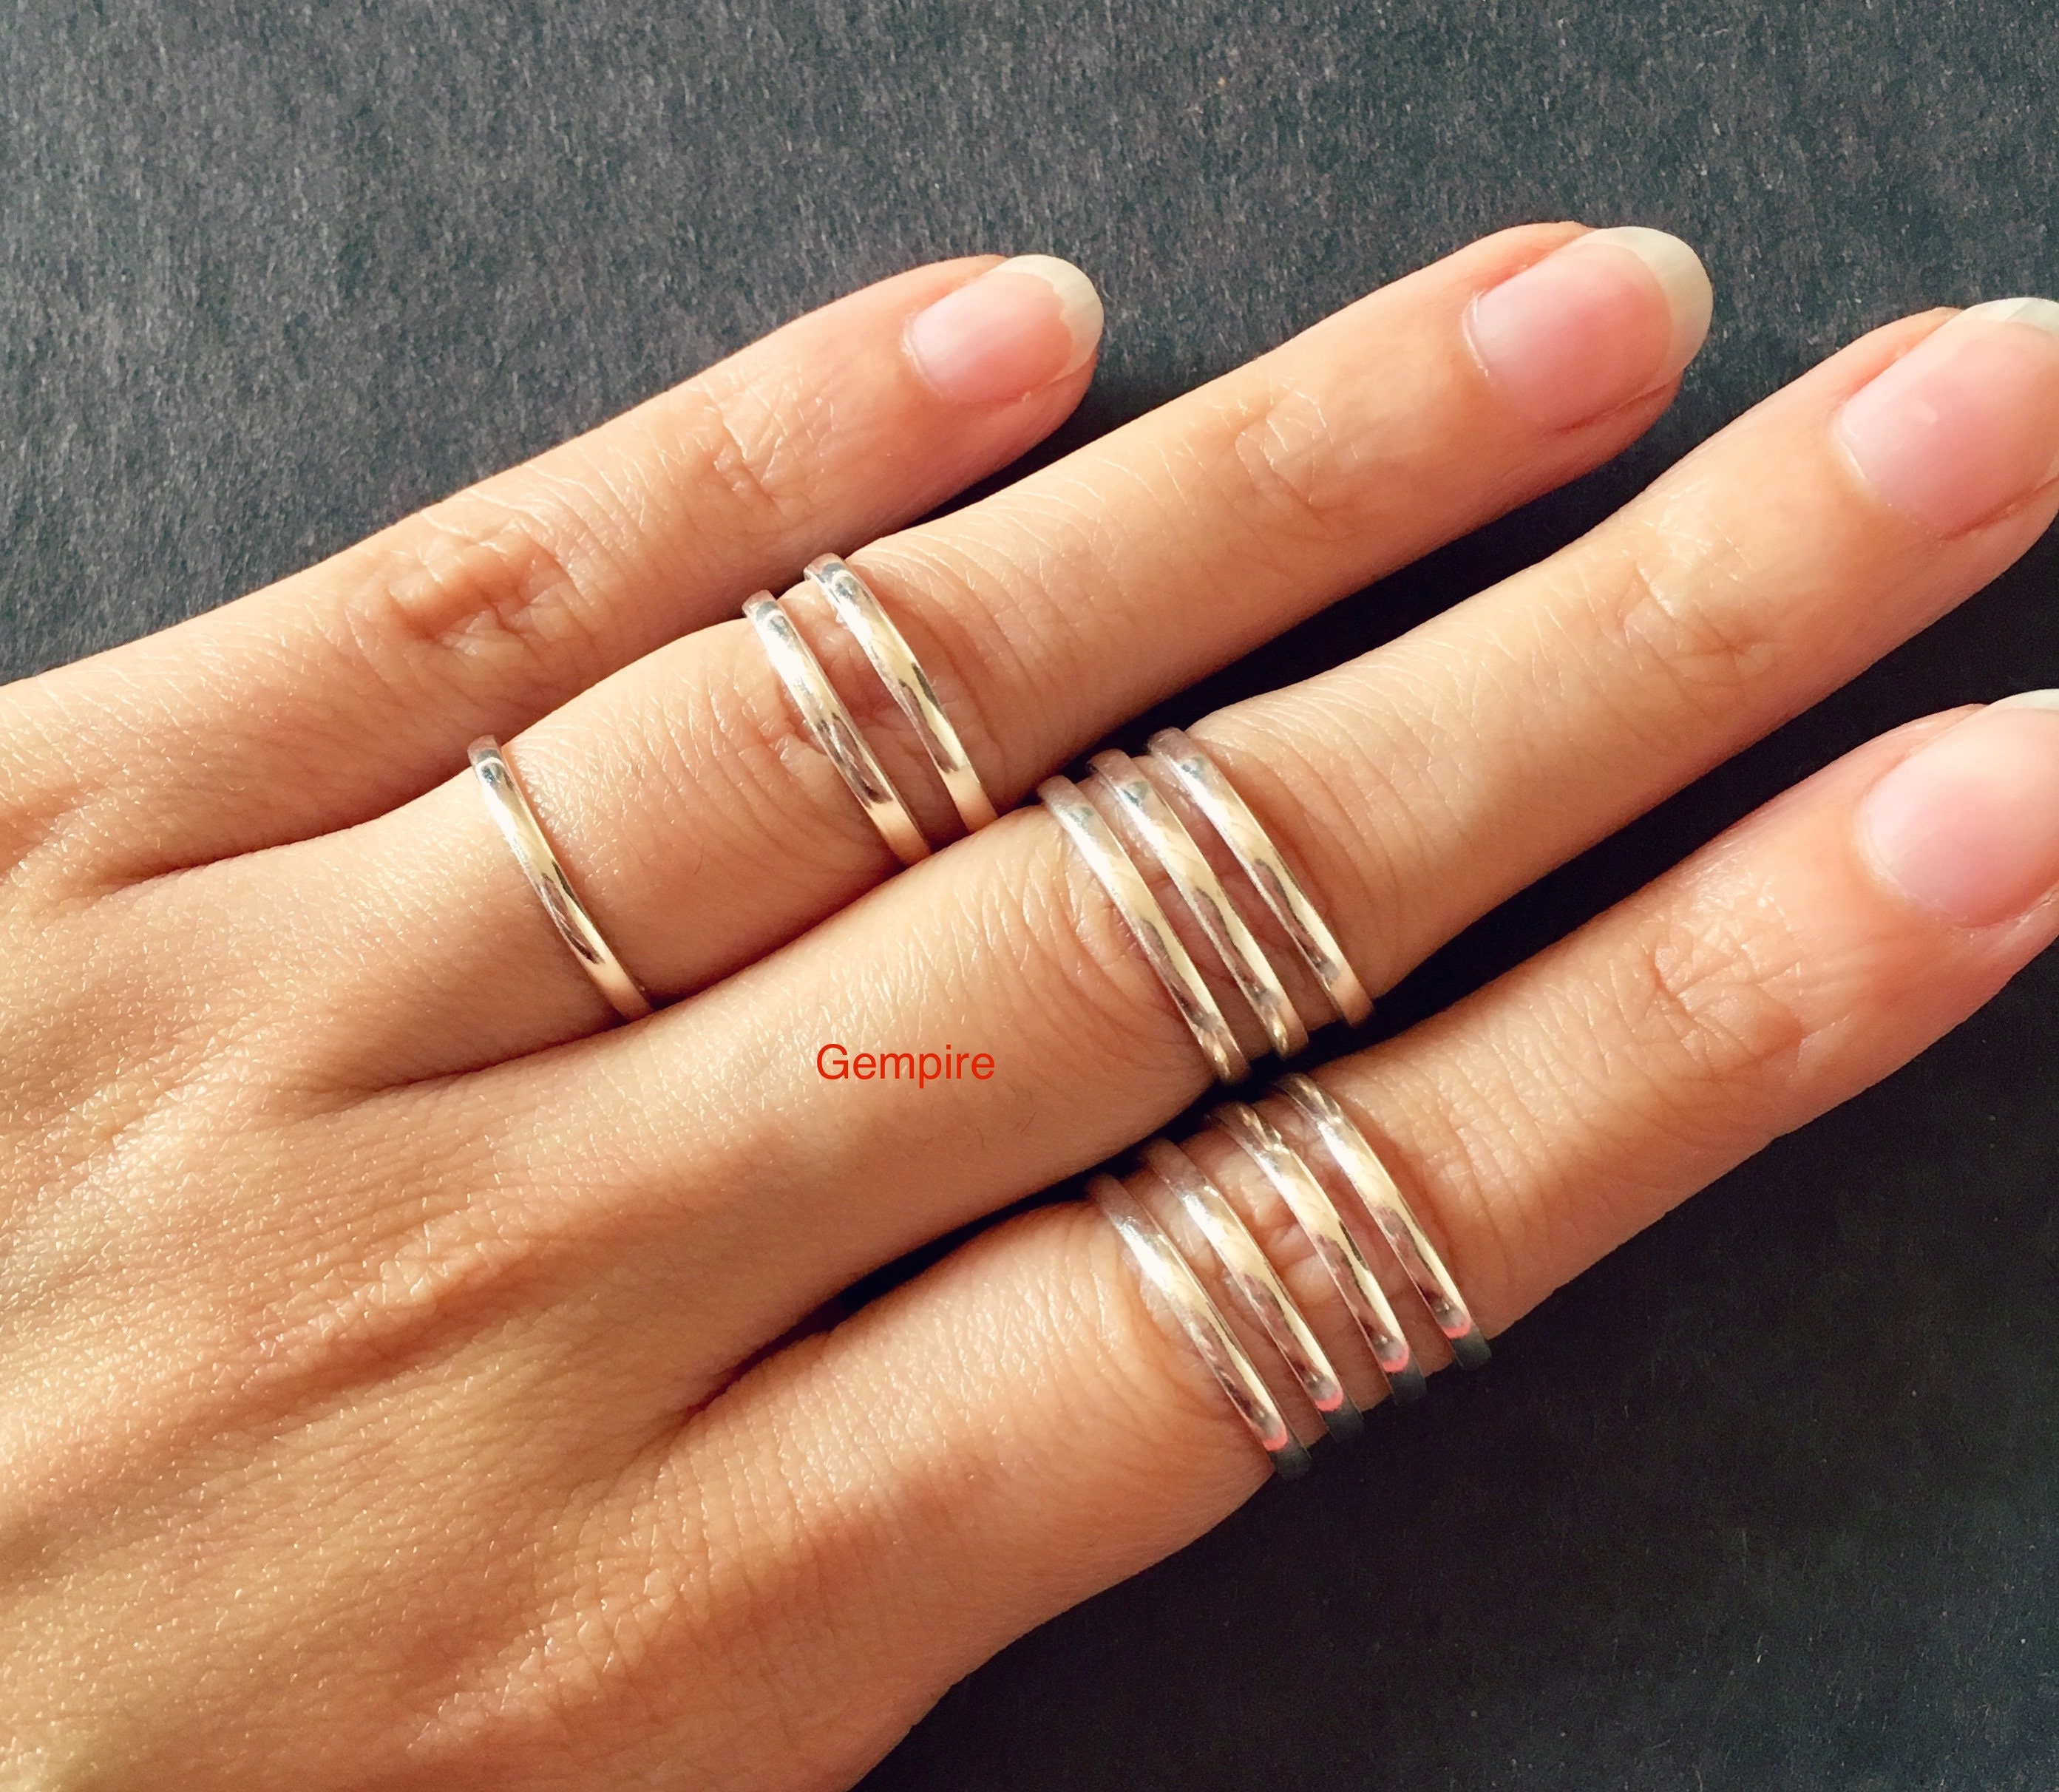 Sterling Silver Coil Toe Rings, Plain Spiral Helix Knuckle Midi Rings, Body  Jewelry FREE SIZE Indian Tribal Toe Rings, Boho Foot Accessories 